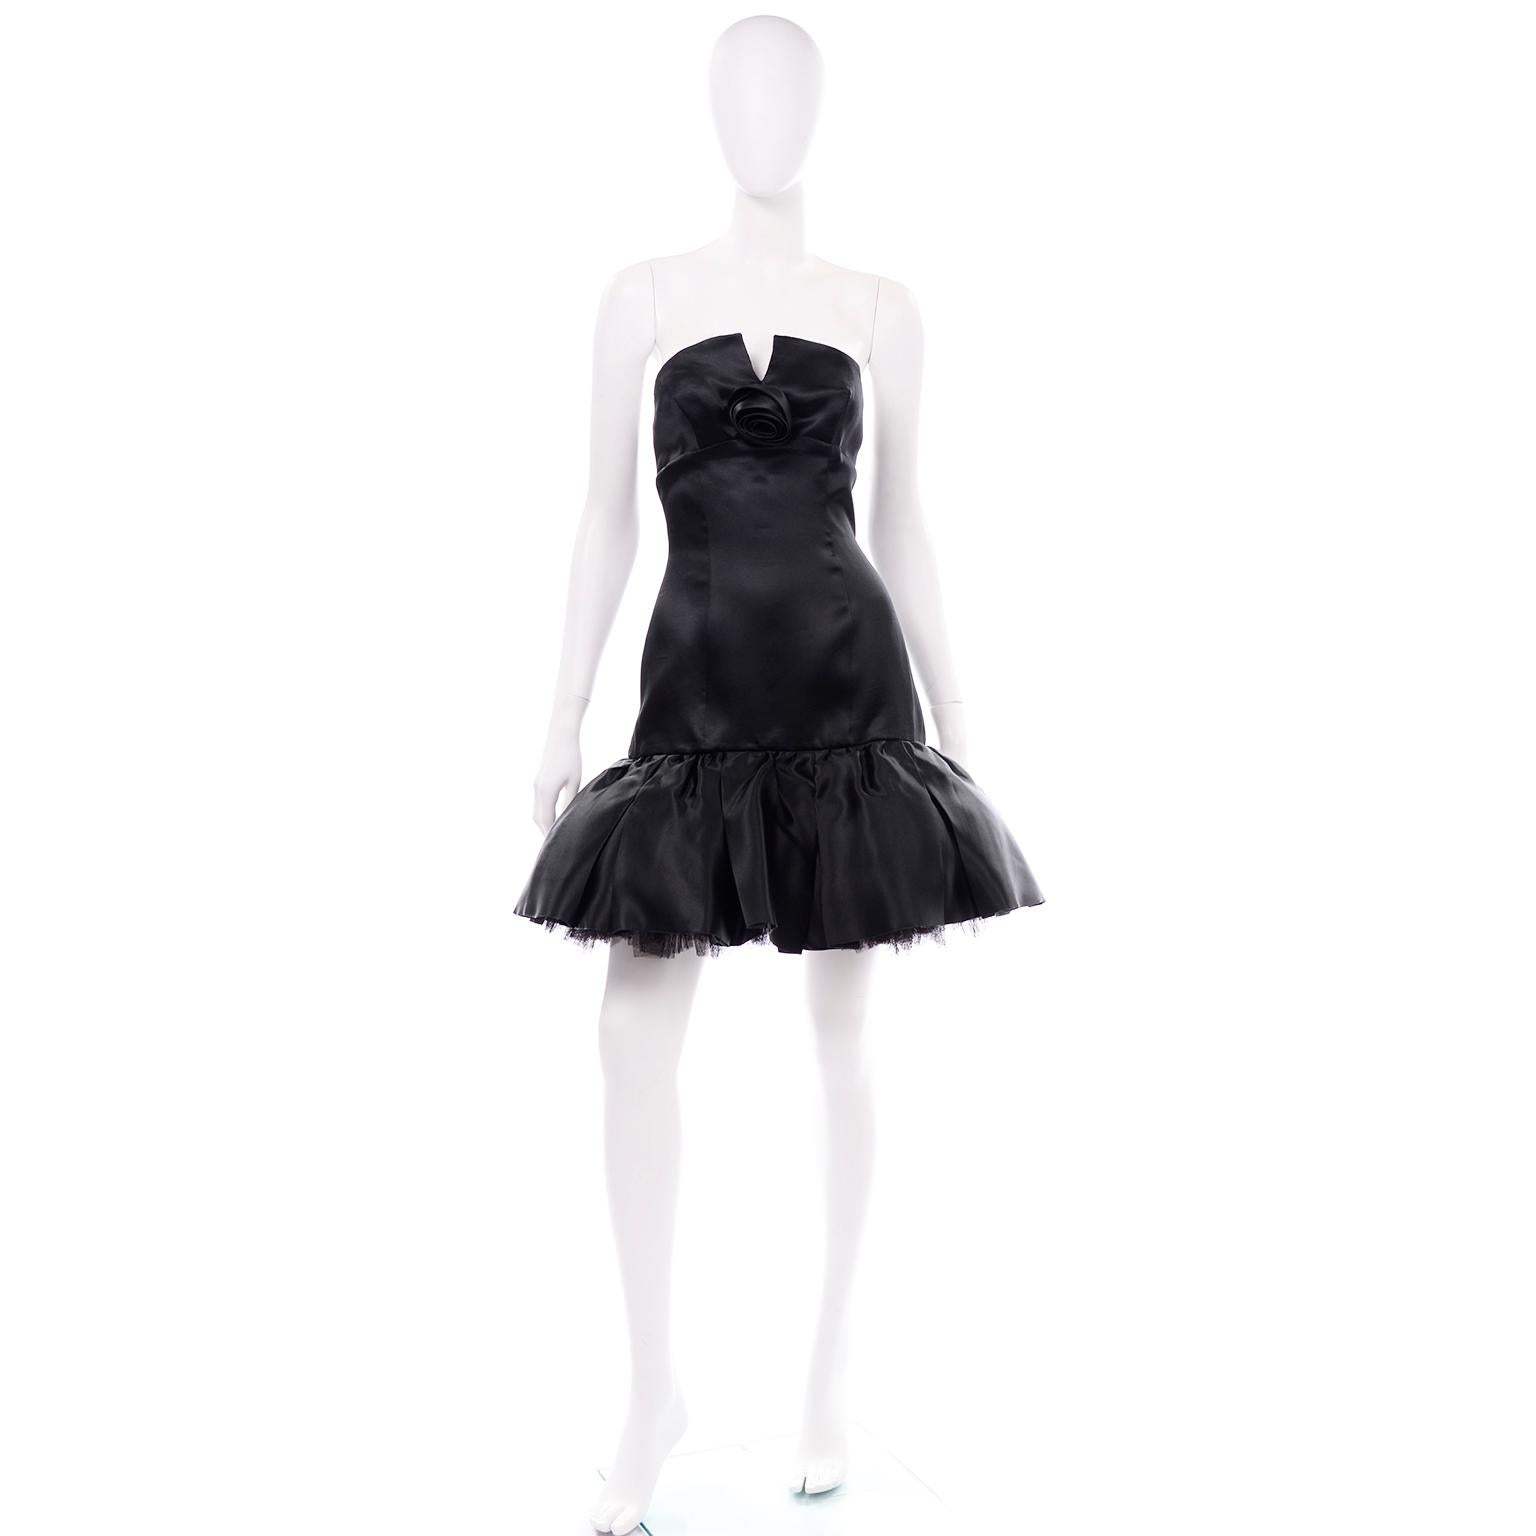 This beautiful soft black silk satin vintage David Fielden dress has a tulle petticoat for fullness and a round strapless with a small v-cut down the center. There is an empire waistline and a center focus is the satin silk rose. There is metal